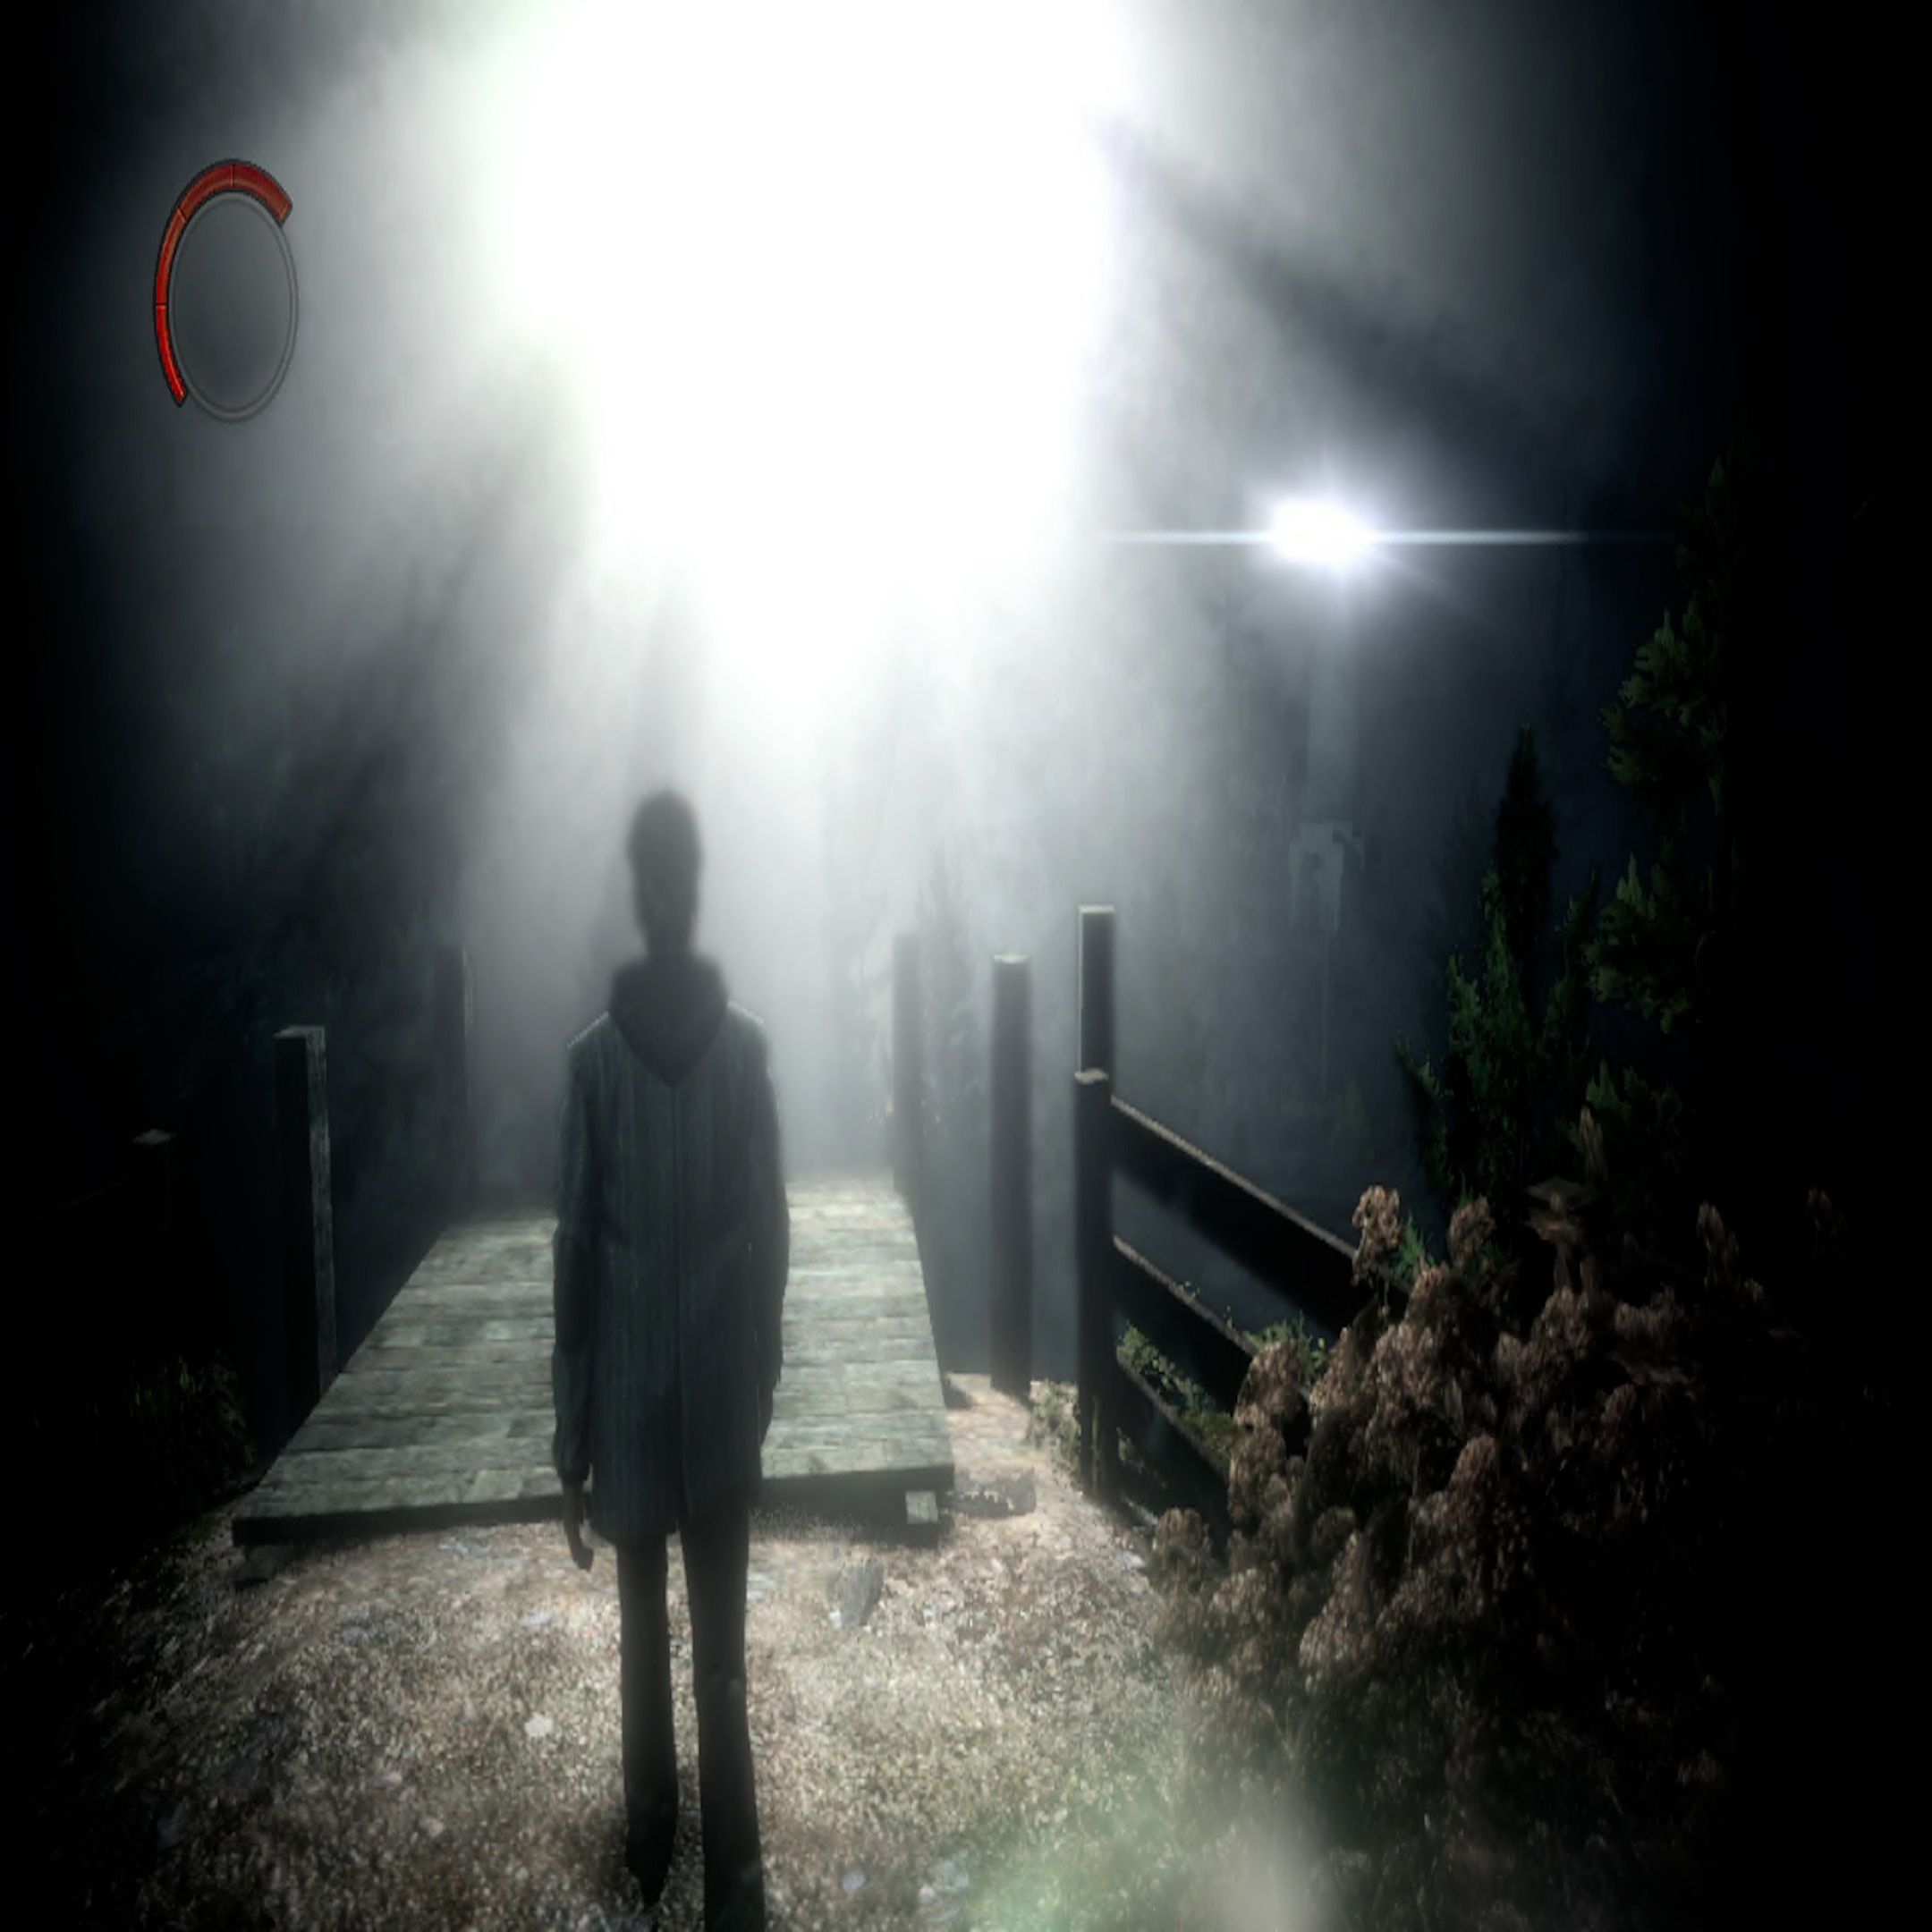 Alan Wake Remastered will see Xbox 360 classic finally debut on PlayStation, Culture